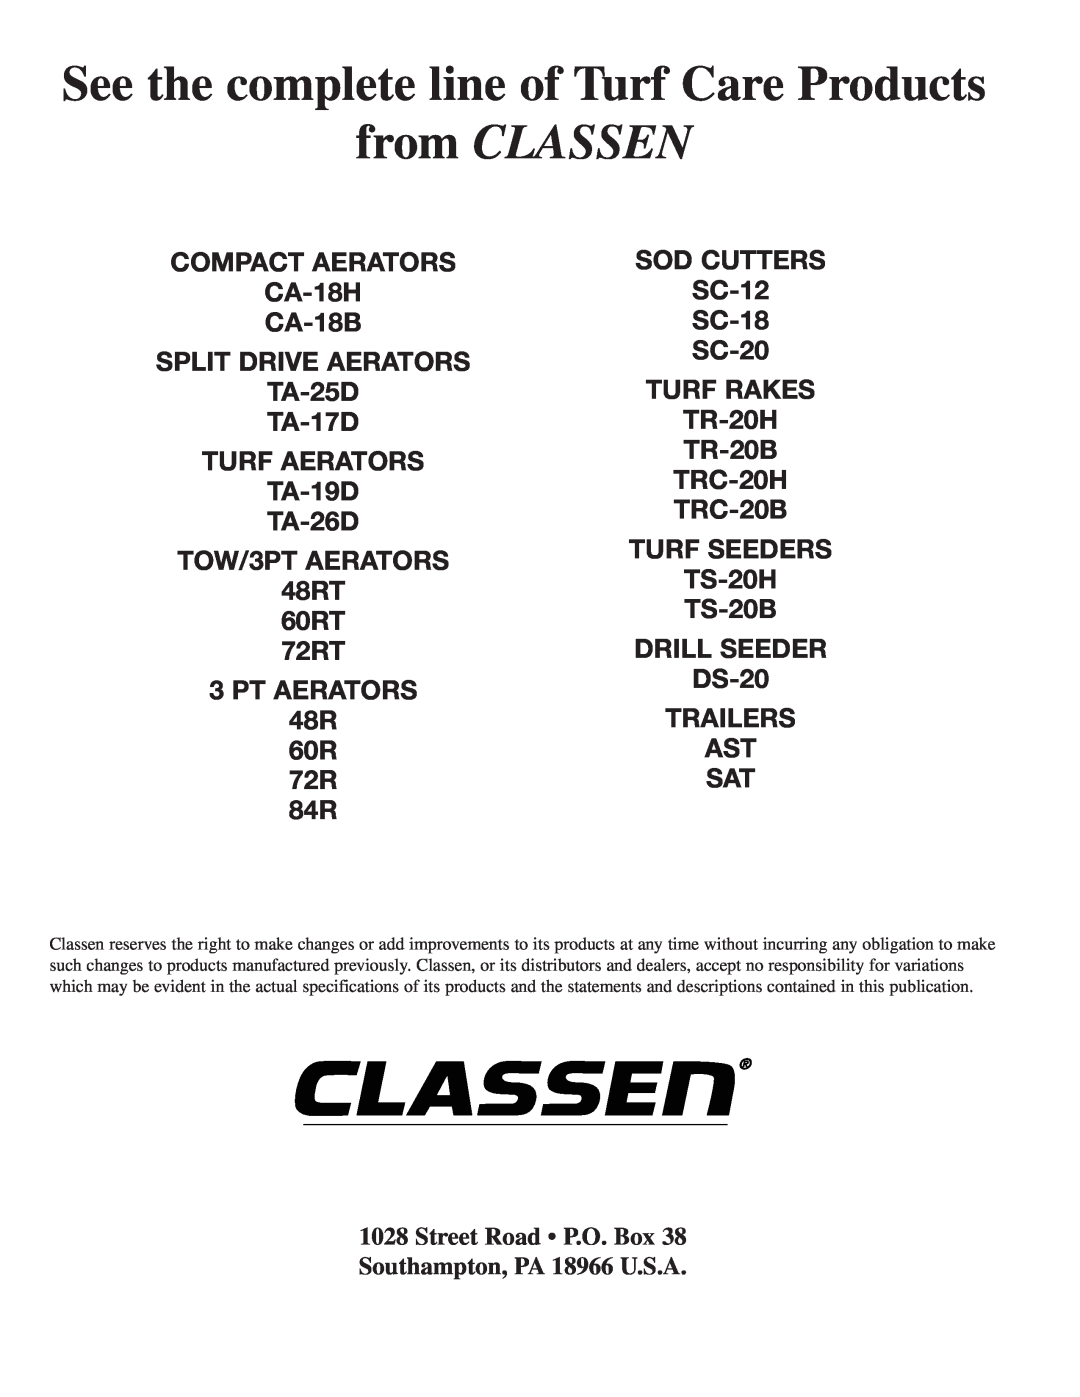 Classen 72-RT, TA-26D, TA-25D, 60-RT, TA-19D, TA-17D, CA-18, 48-RT See the complete line of Turf Care Products, from CLASSEN 